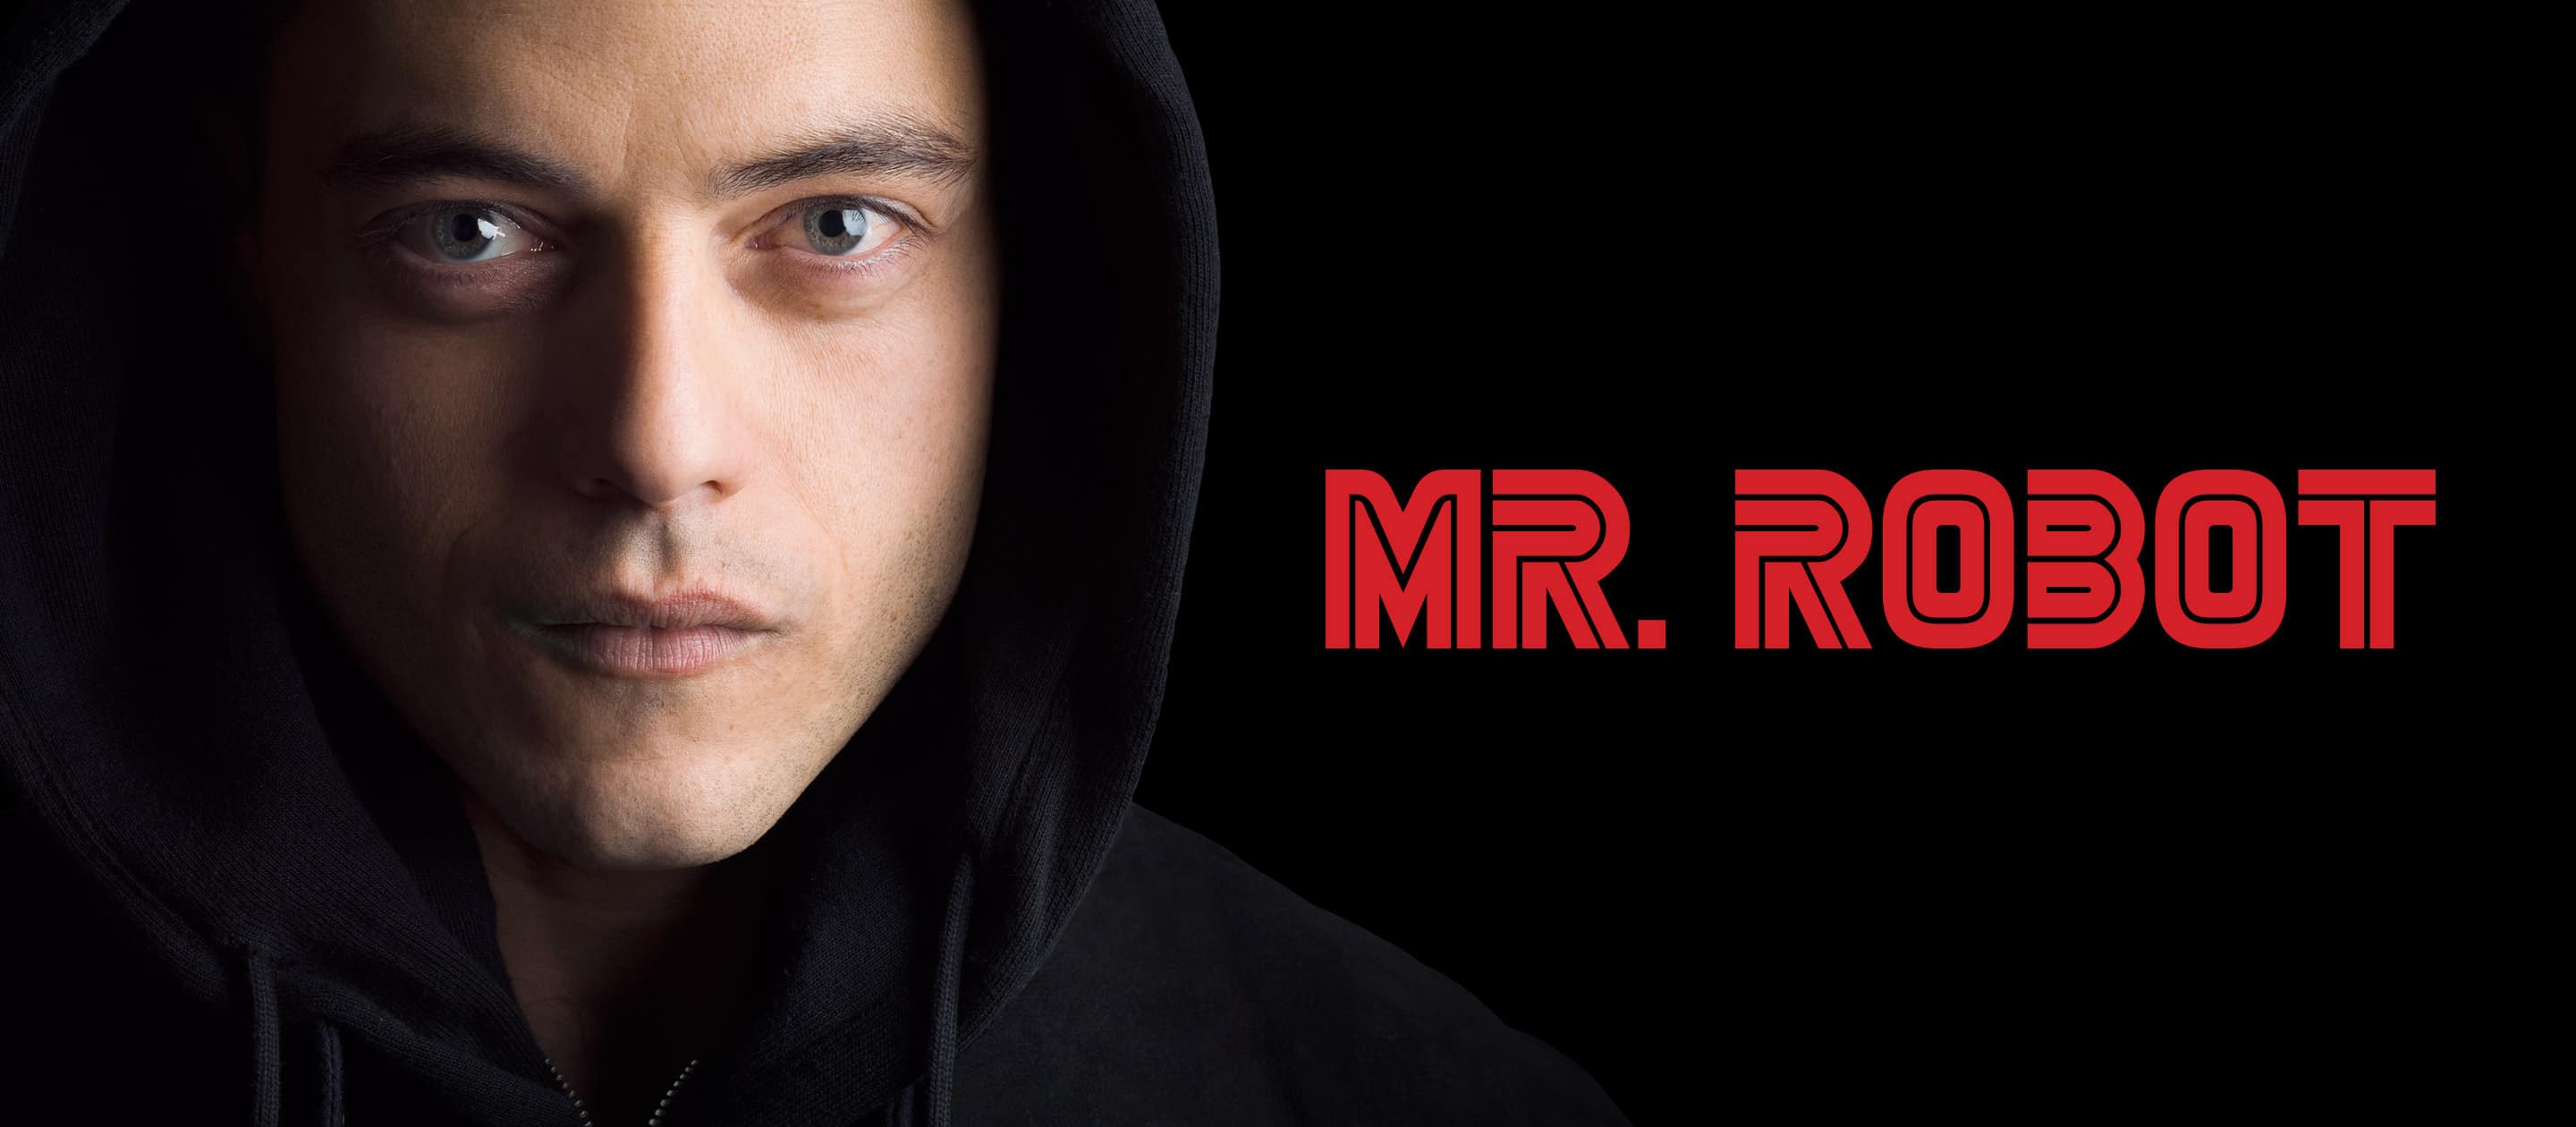 Within App Offers Live Simulcast of ‘Mr. Robot VR Experience’